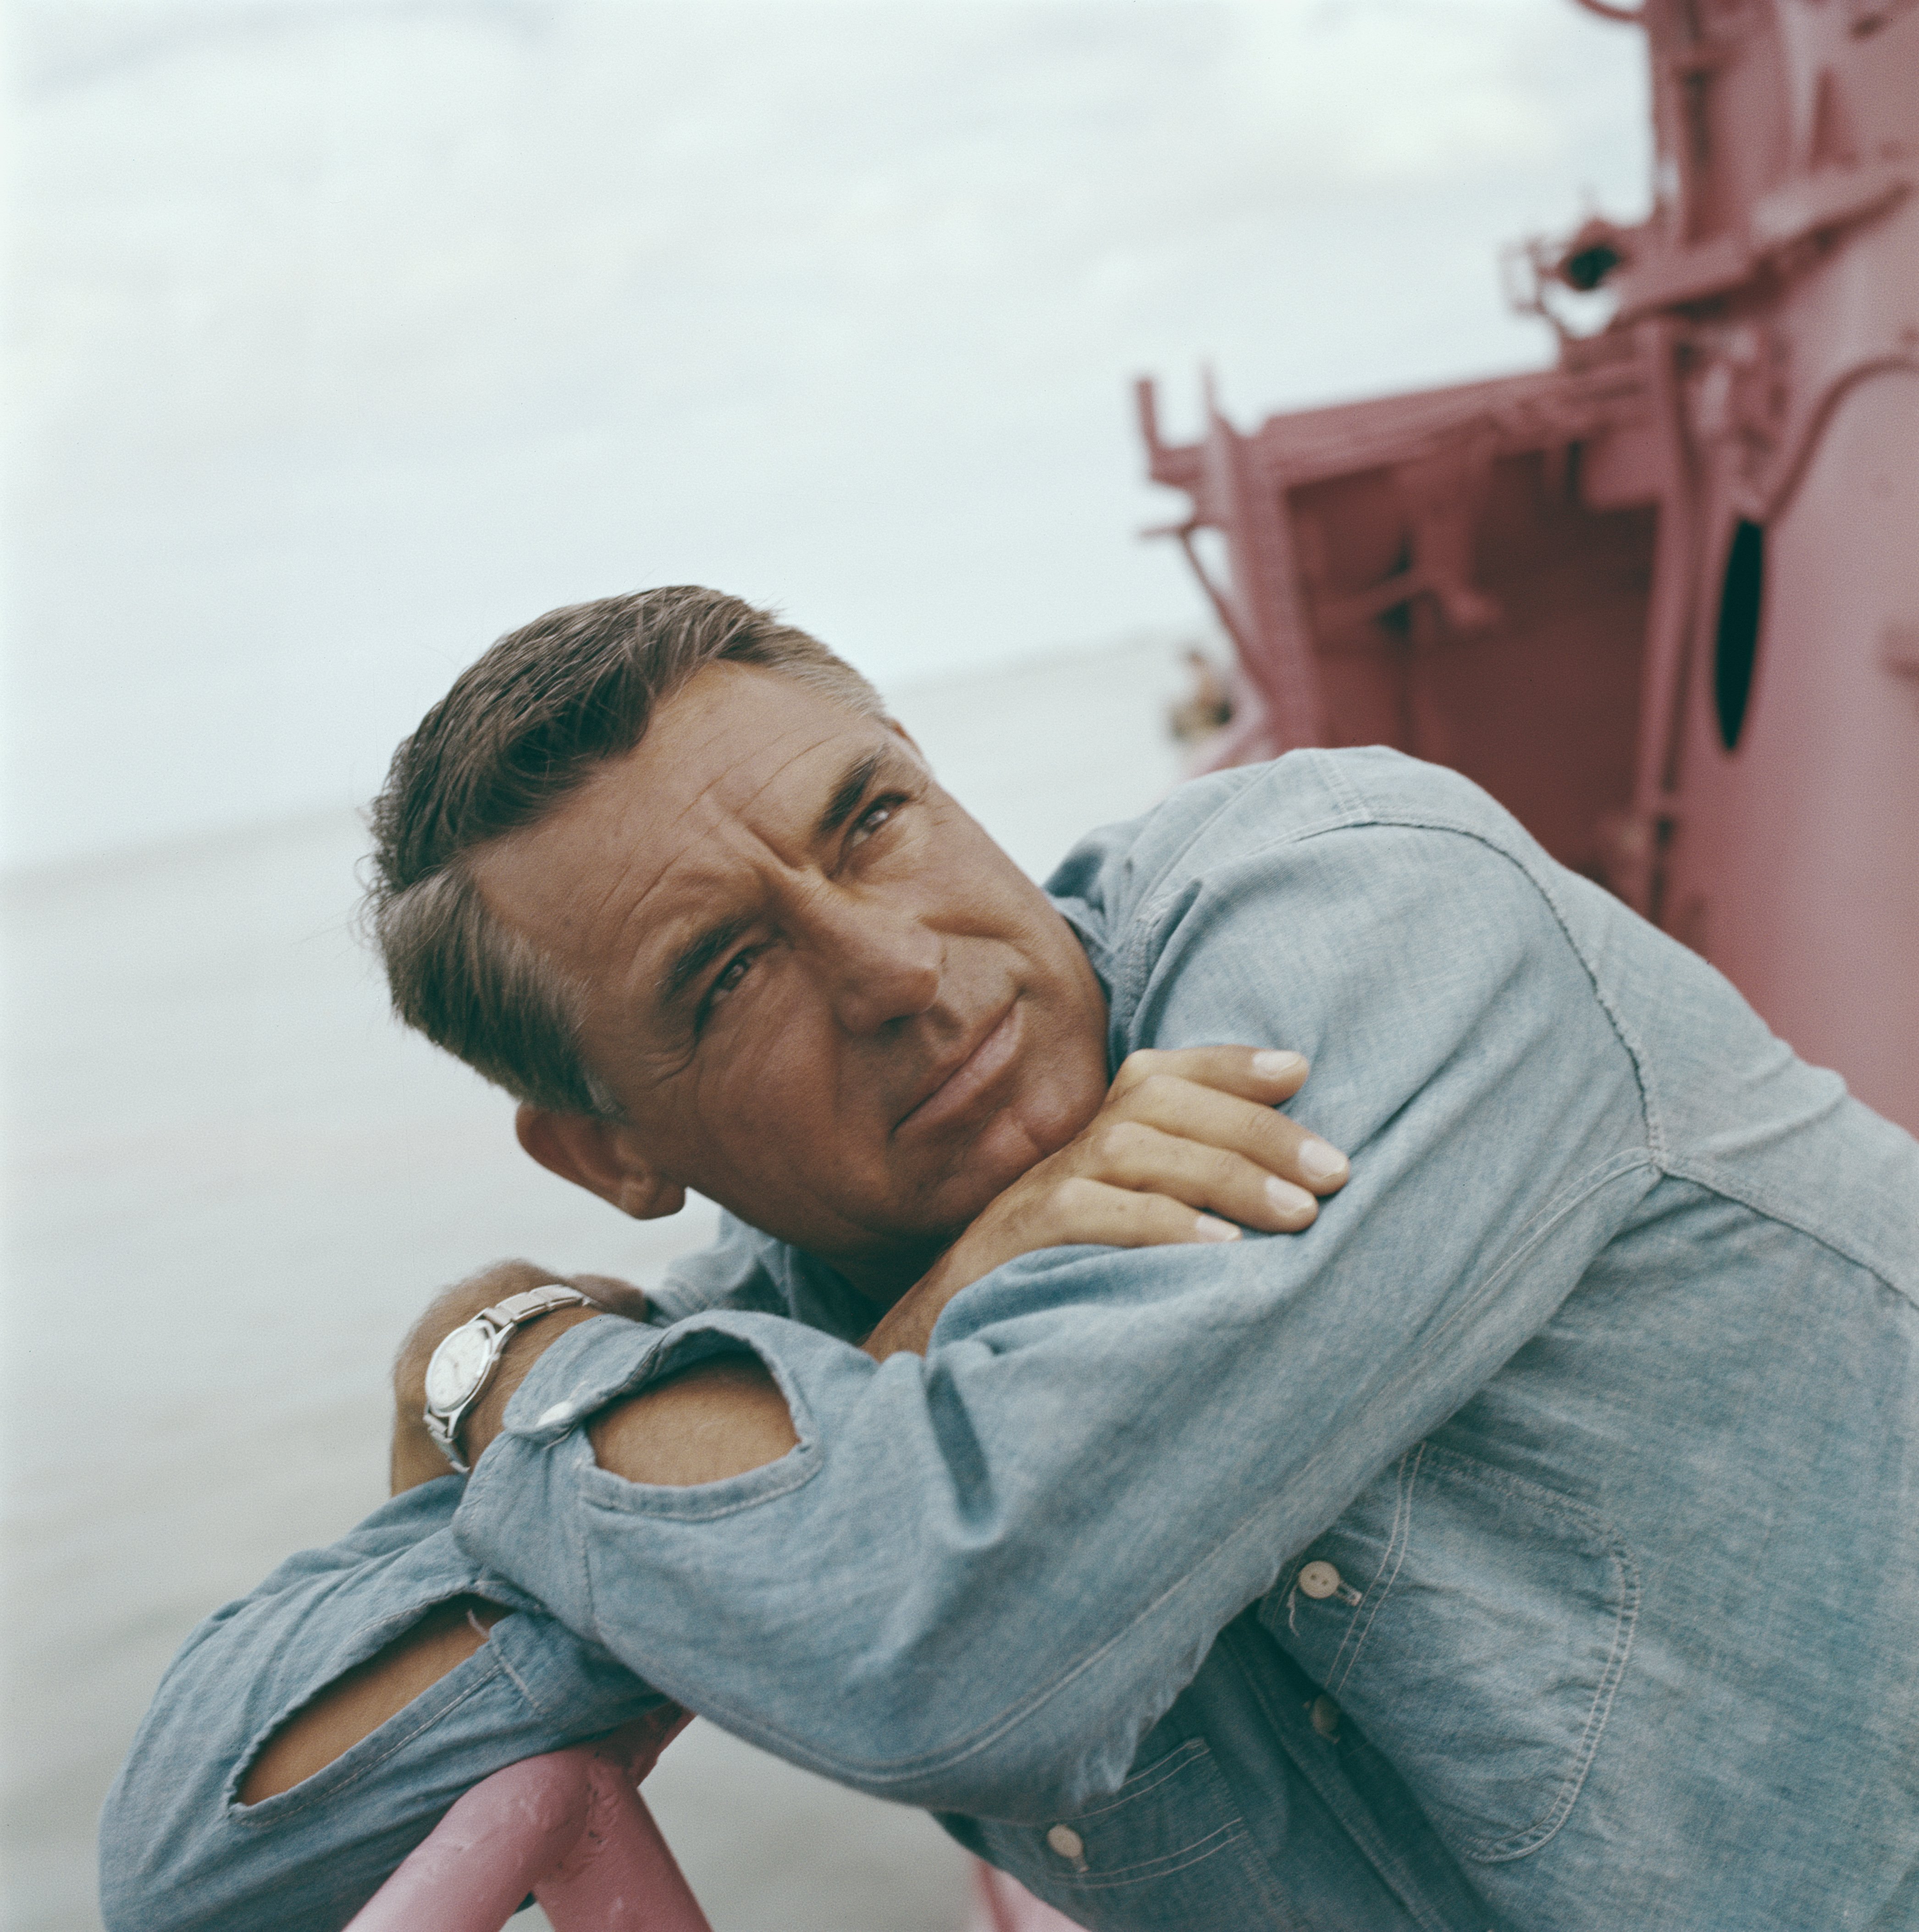 Actor Cary Grant (1904 - 1986) on the deck of a ship, circa 1955. | Source: Getty Images